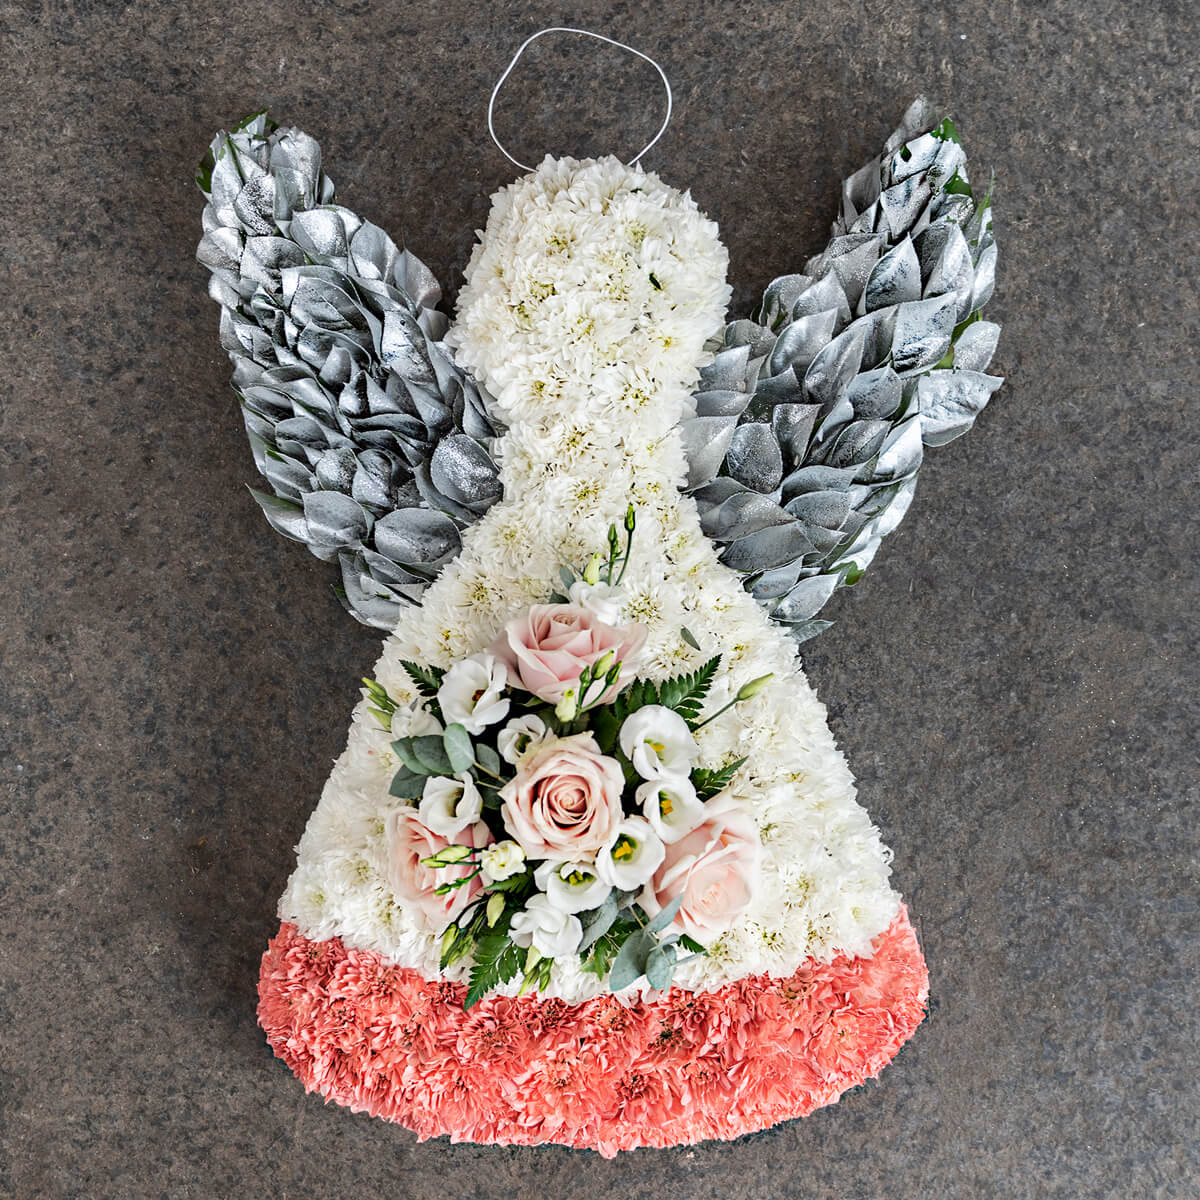 Personal Floral Tributes